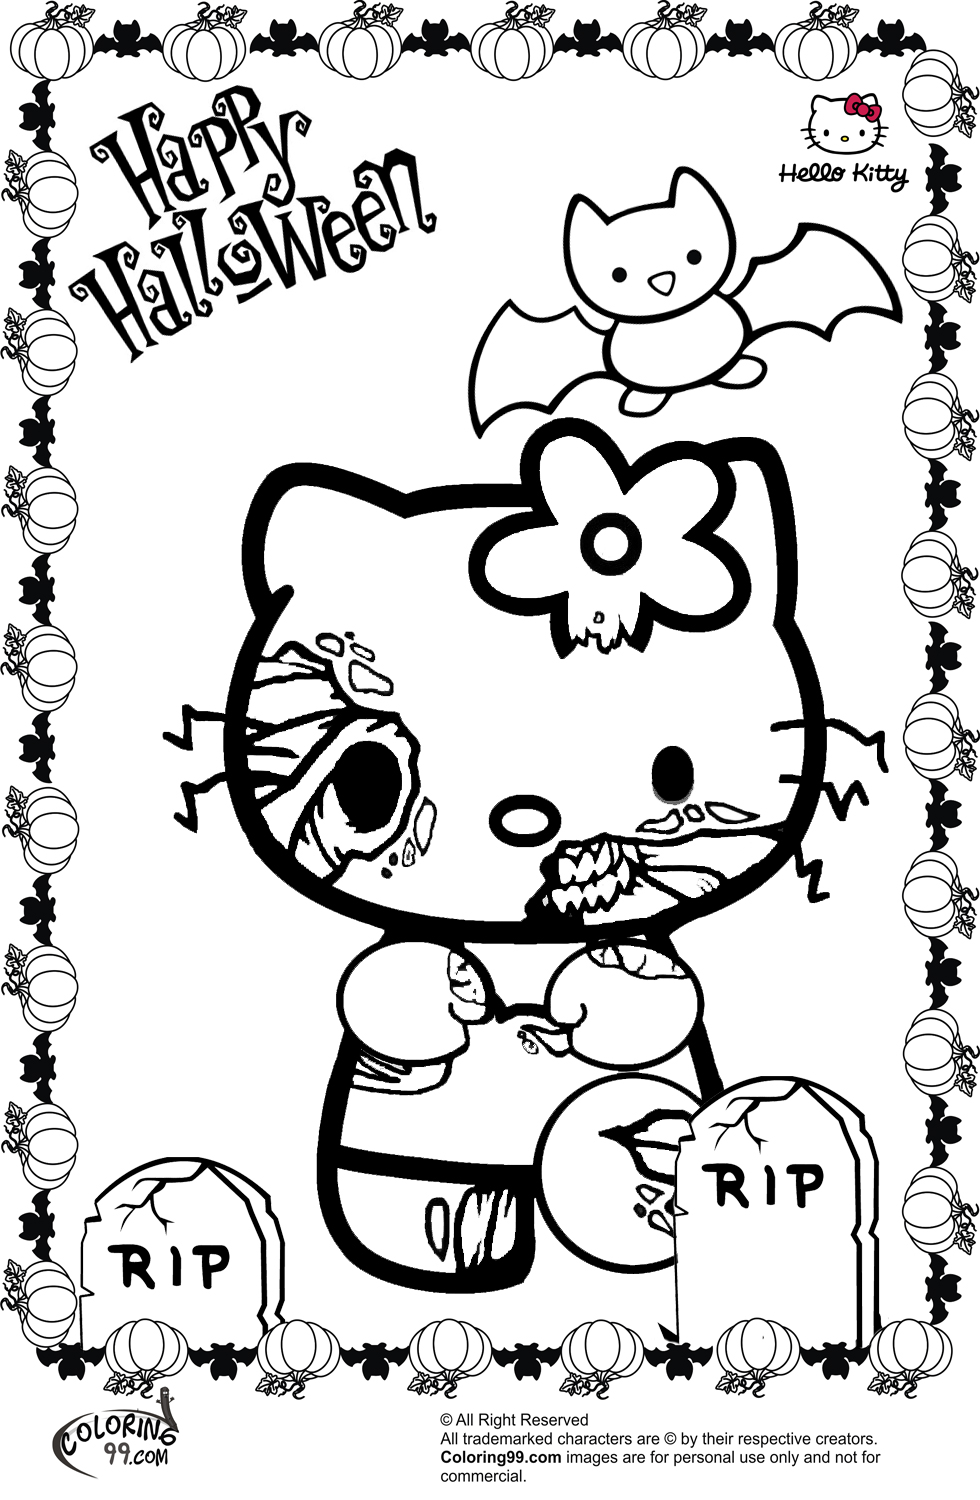 Download Hello Kitty Halloween Coloring Pages | Minister Coloring